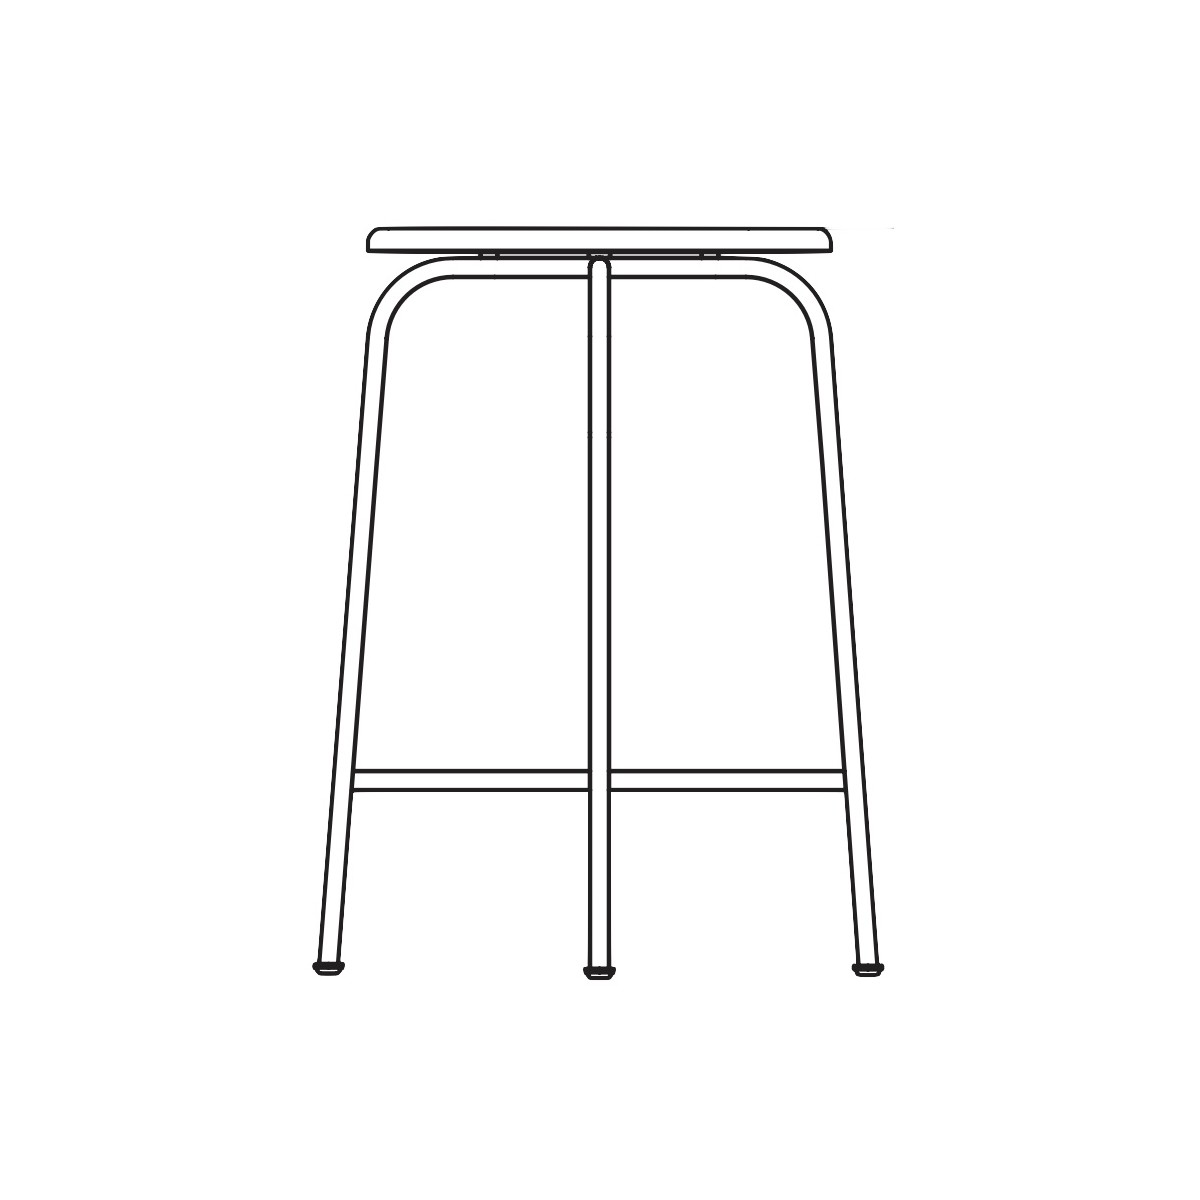 seat height 63,5 cm - Afteroom counter stool